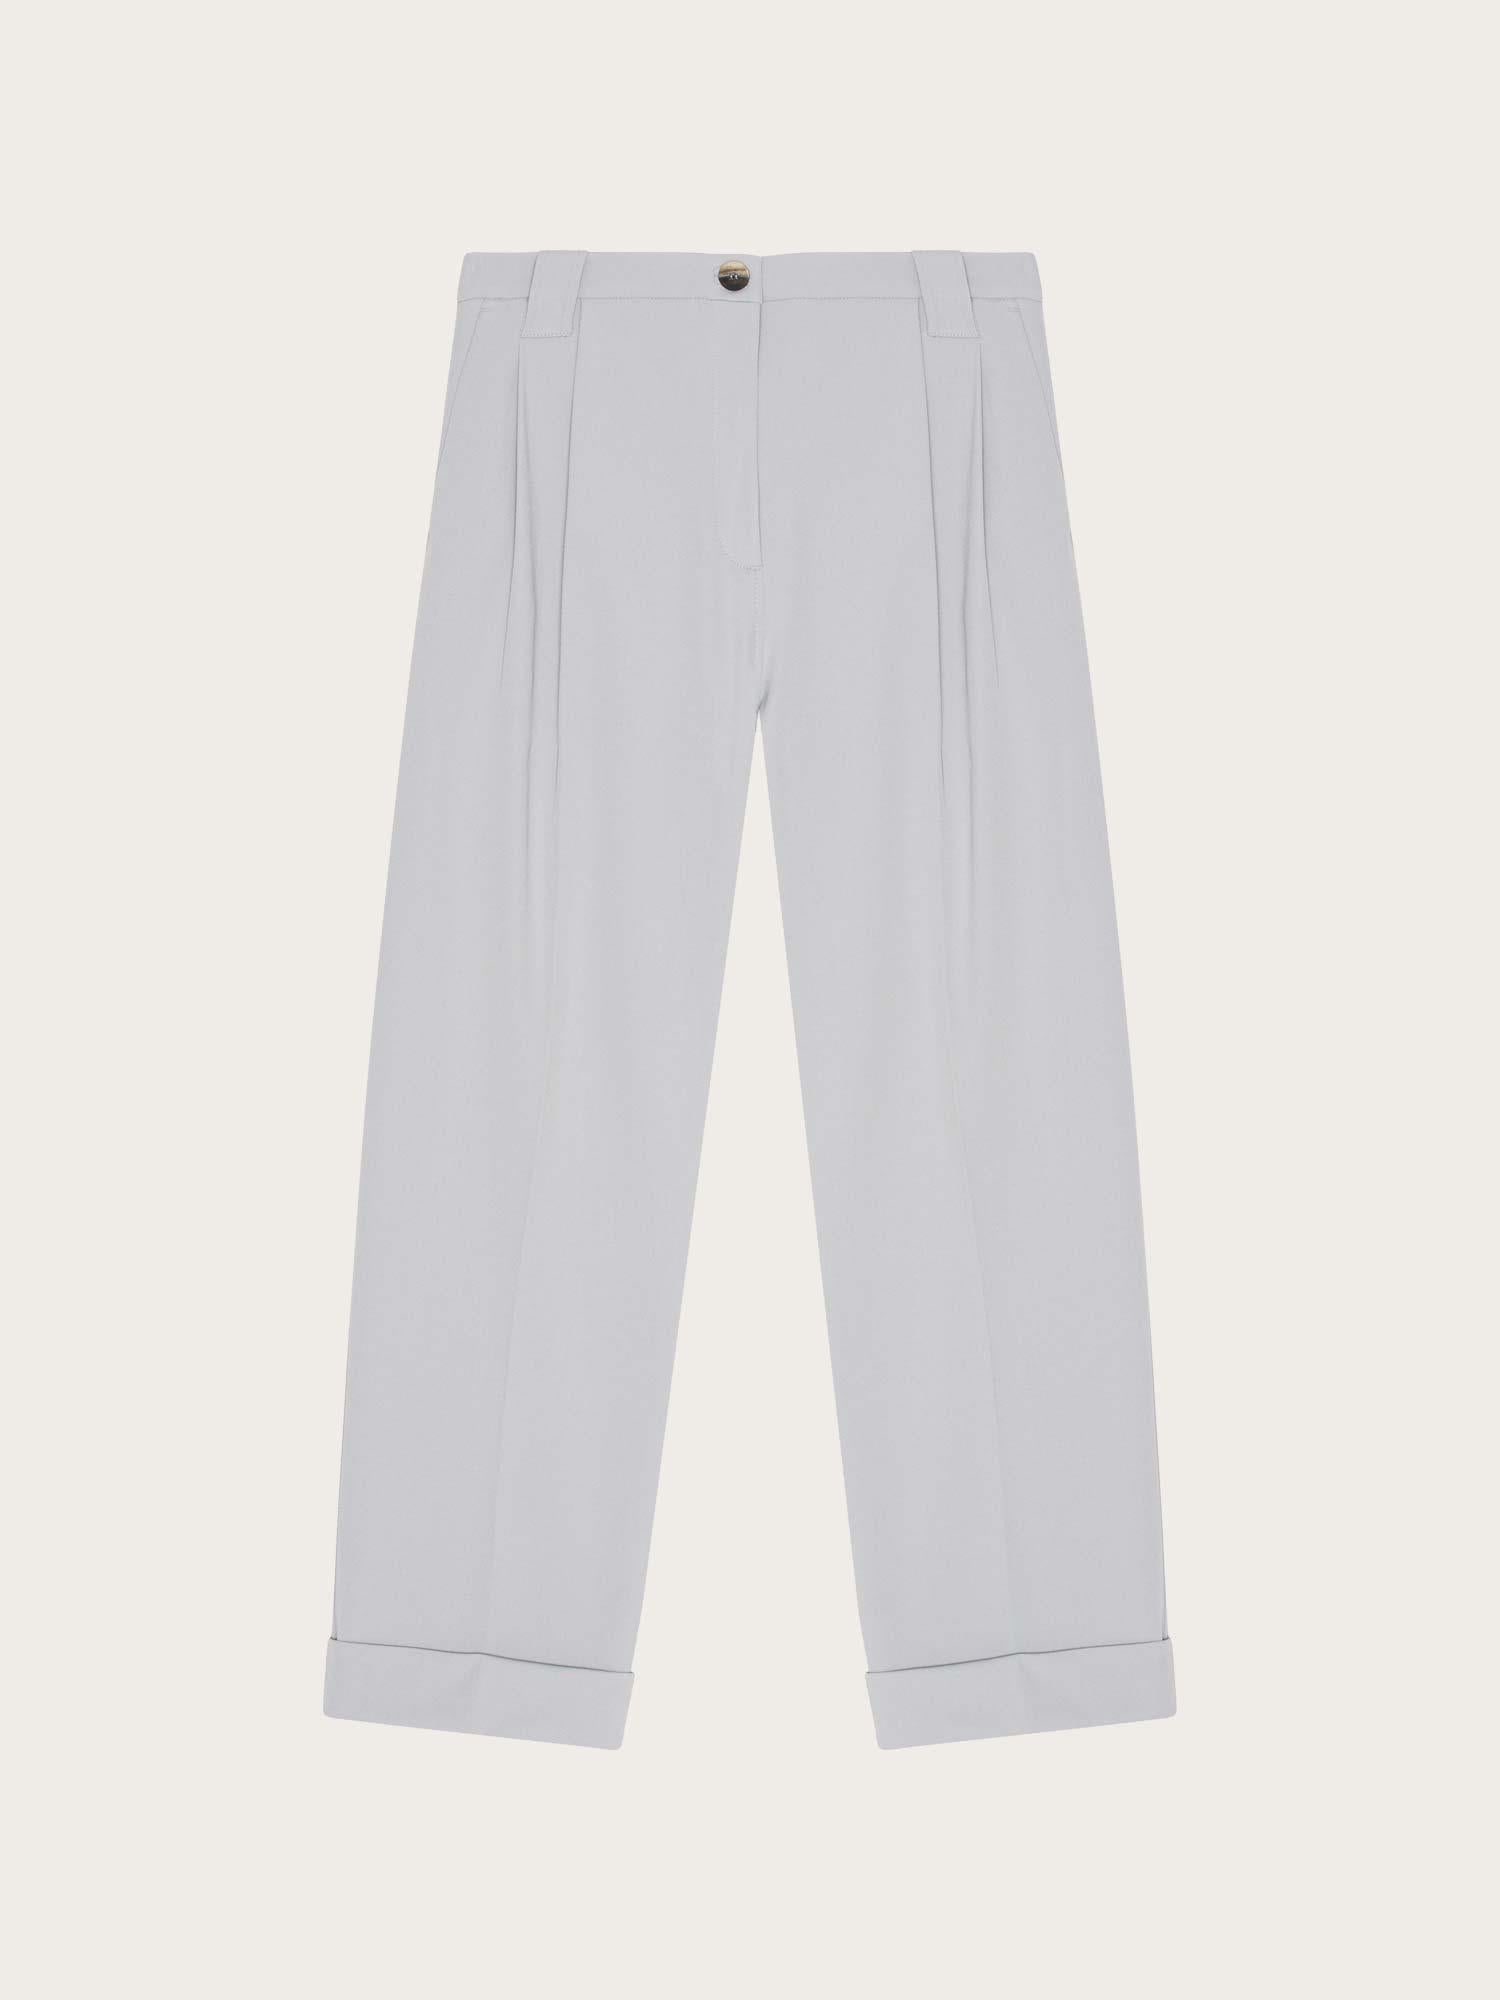 F7581 Twill Suiting Pleated Pants - High Rise